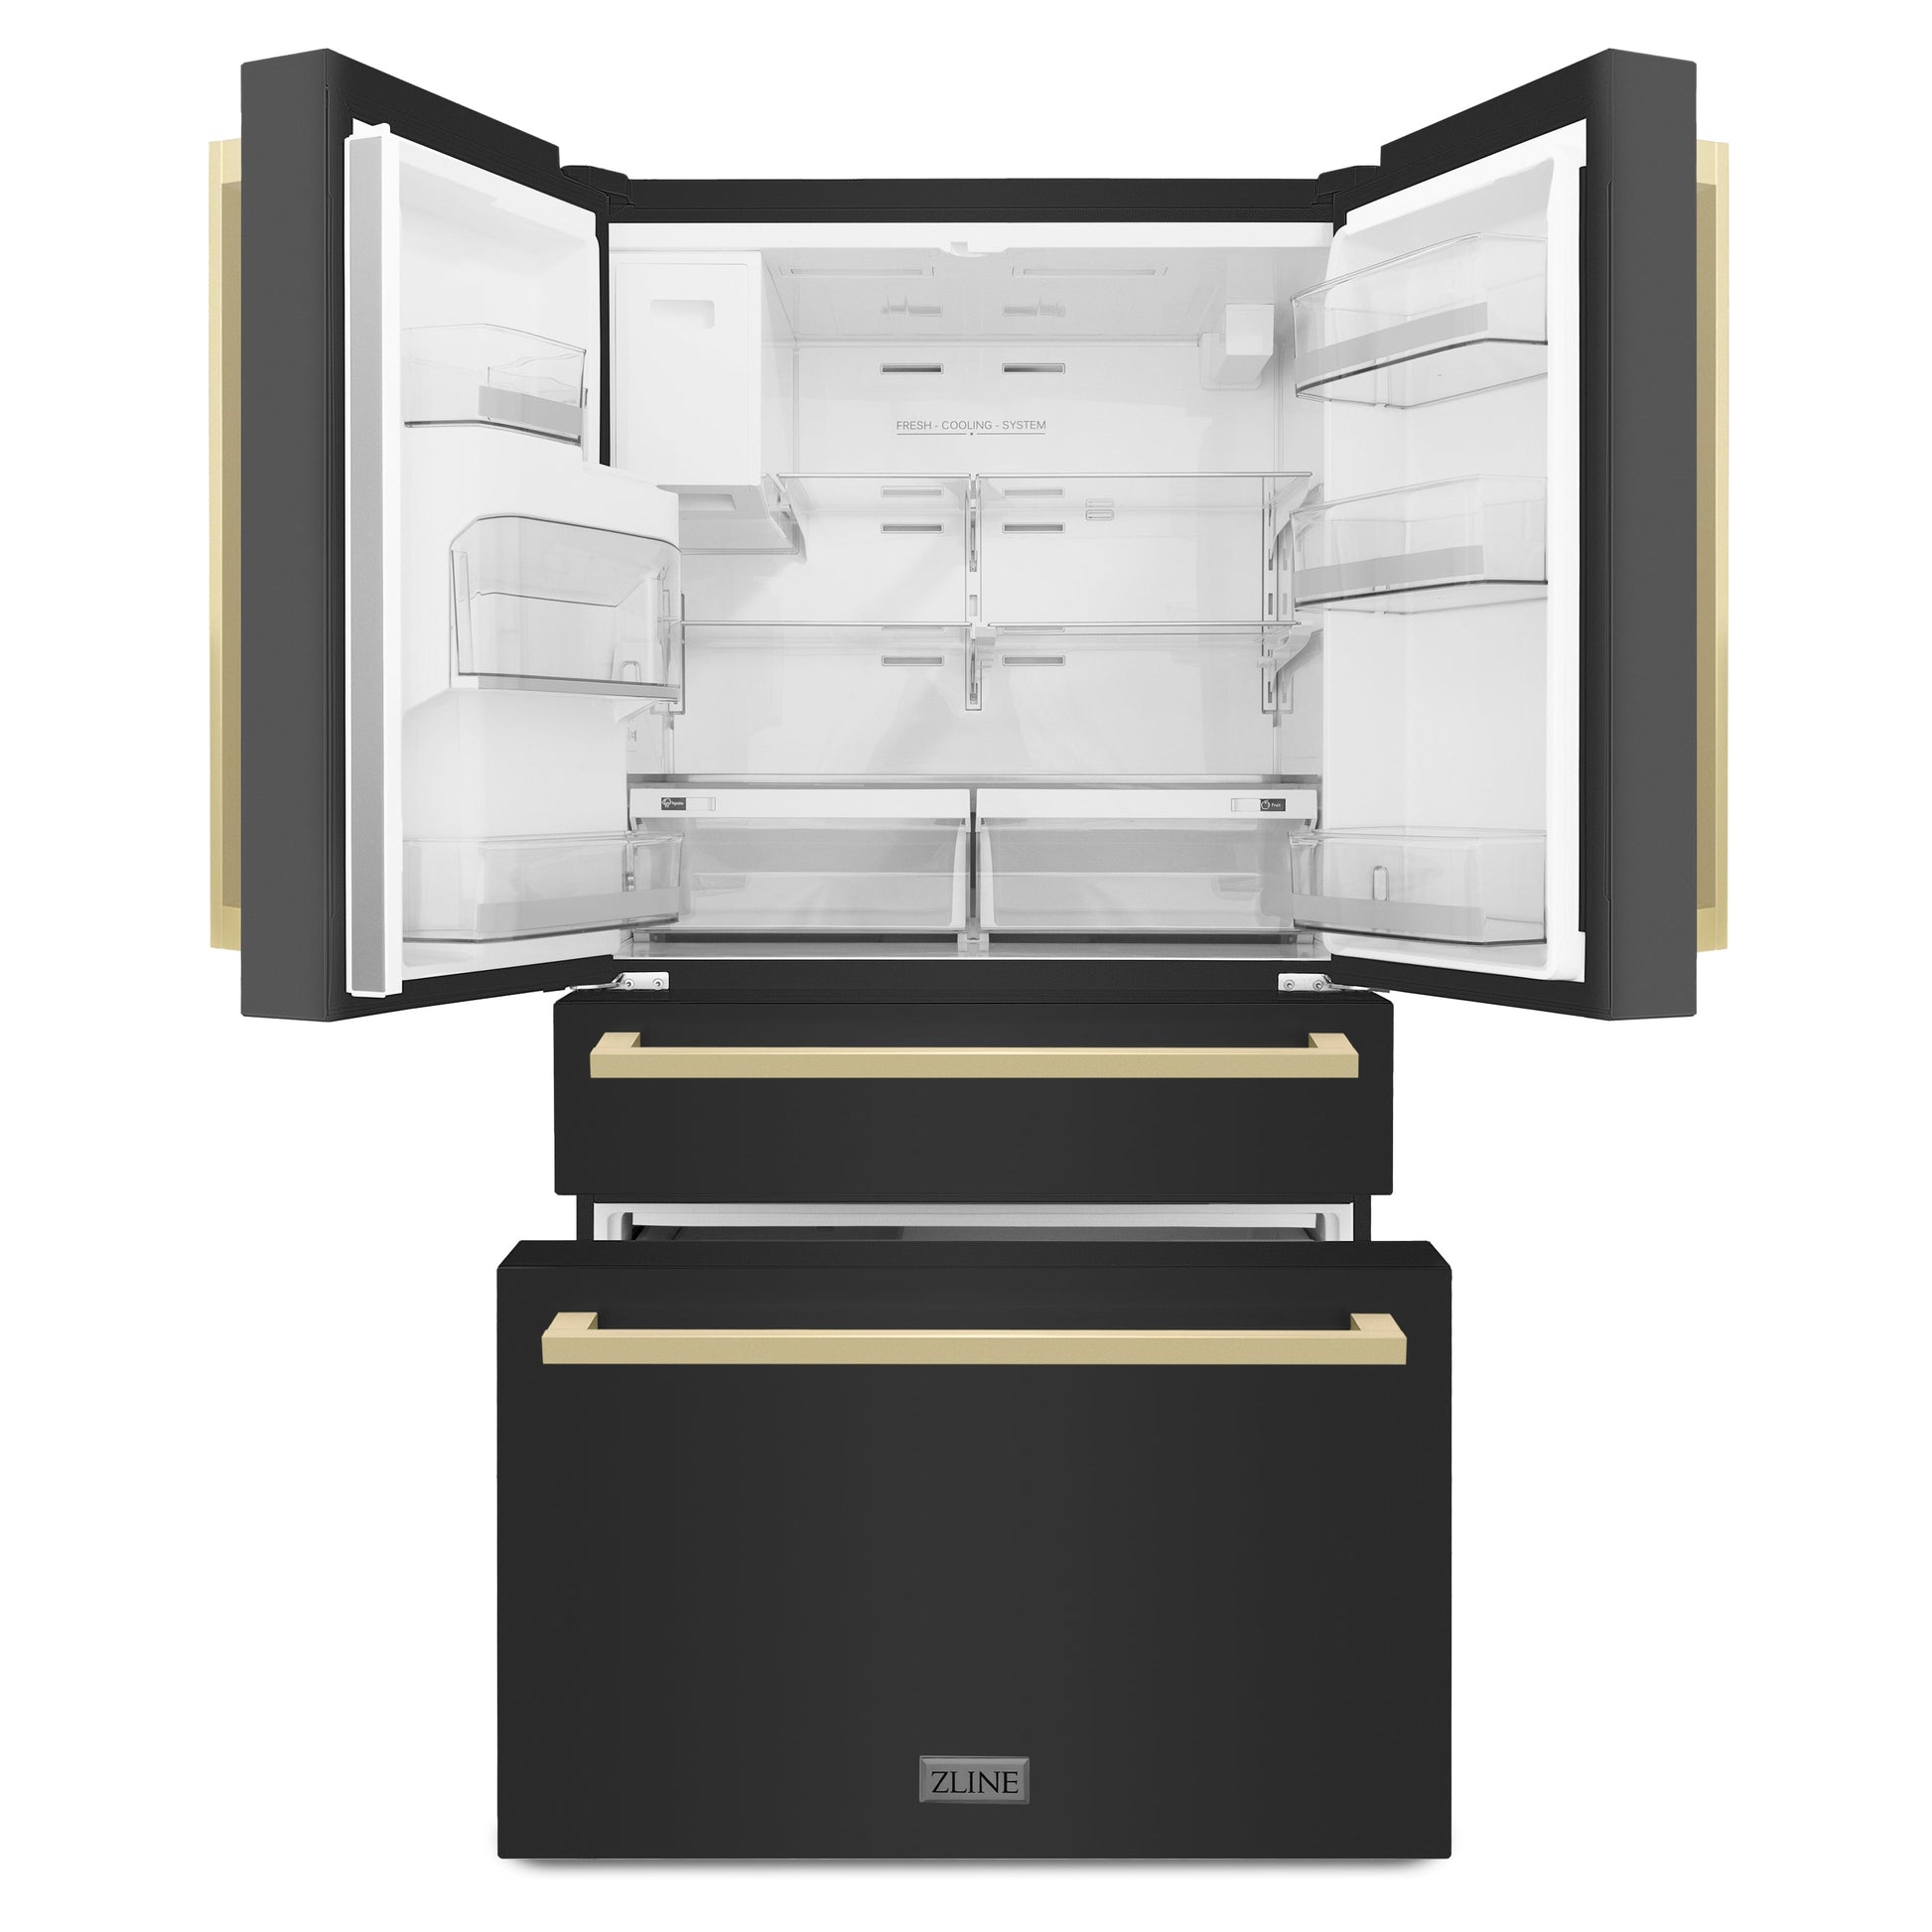 ZLINE 36" Autograph Edition 4-Door French Door Refrigerator with Water and Ice Dispenser - Black Stainless Steel with Champagne Bronze Square Handles